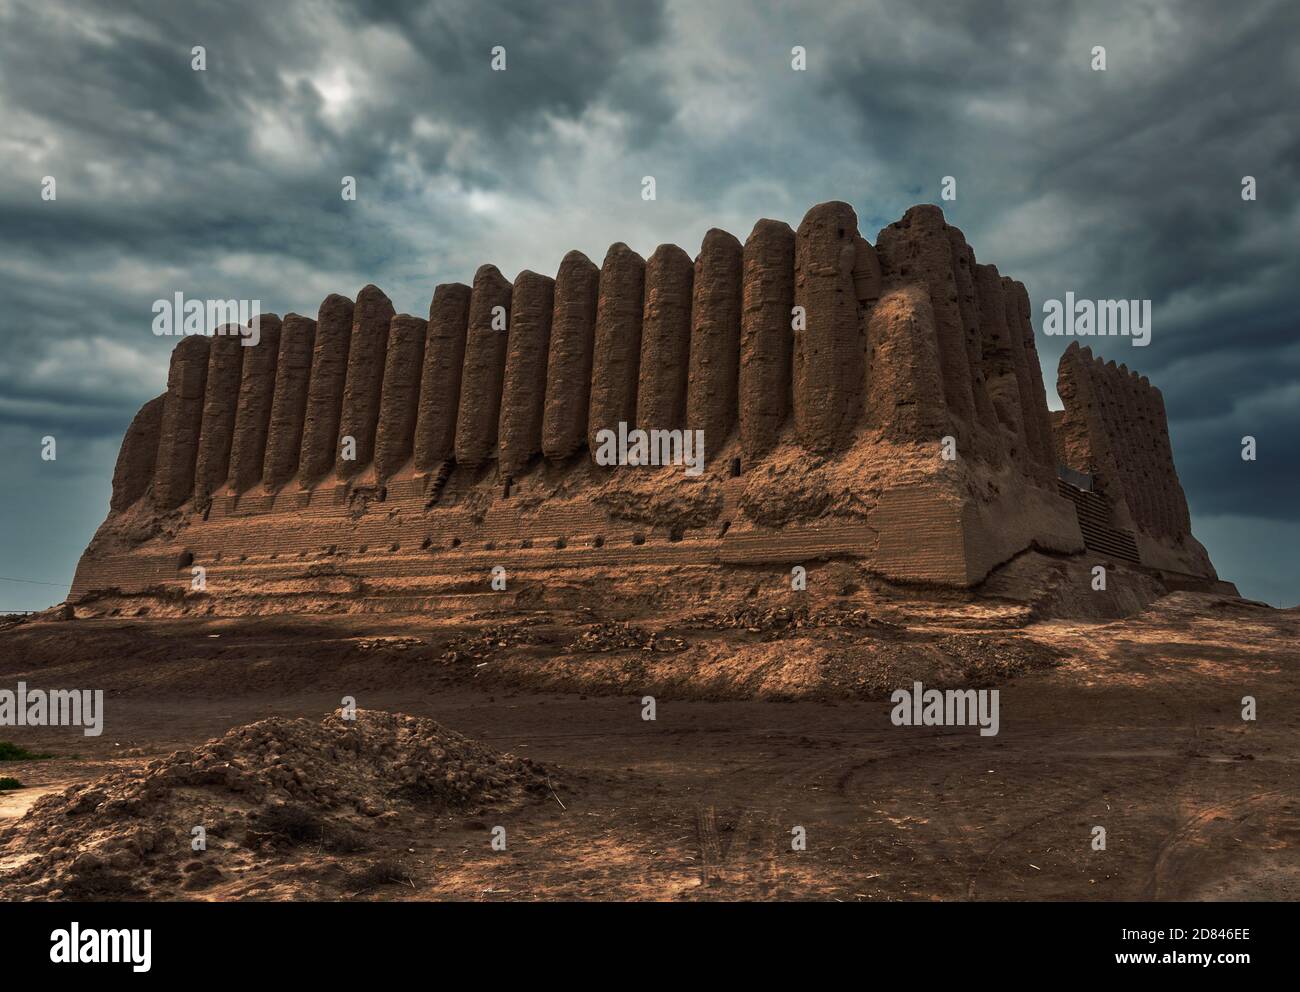 Great Gyz Gala (maidens castle) in an overcast day with stormy clouds hovering above the fortress, located in Mary, Turkmenistan. Stock Photo